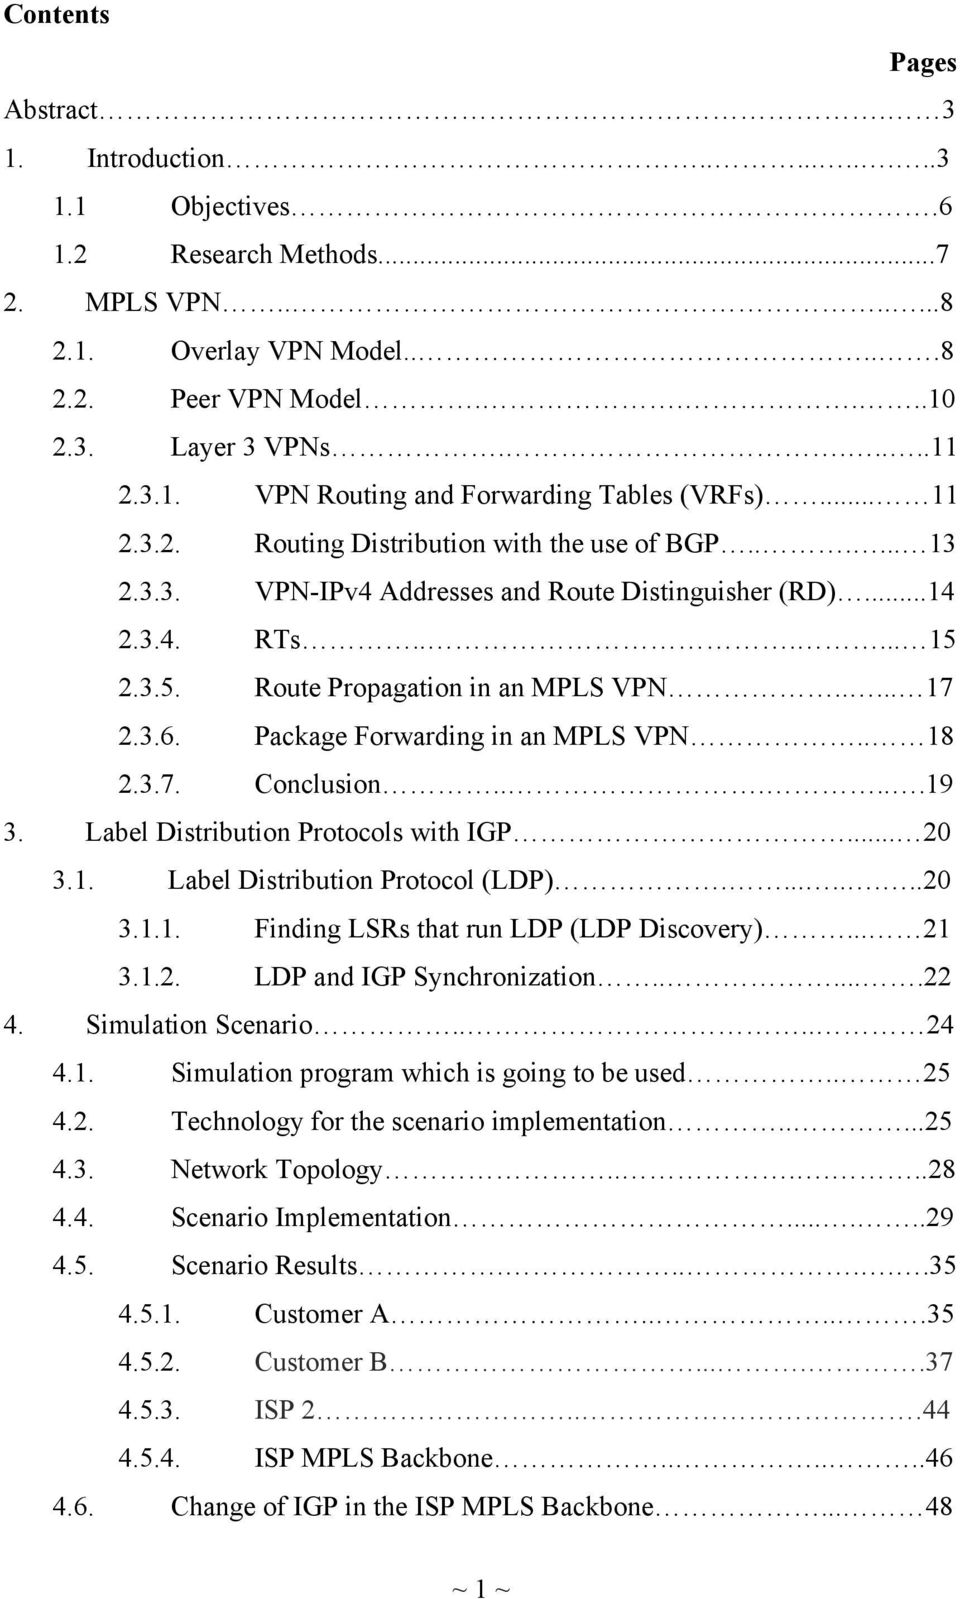 2.3.5. Route Propagation in an MPLS VPN..... 17 2.3.6. Package Forwarding in an MPLS VPN.. 18 2.3.7. Conclusion......19 3. Label Distribution Protocols with IGP... 20 3.1. Label Distribution Protocol (LDP).